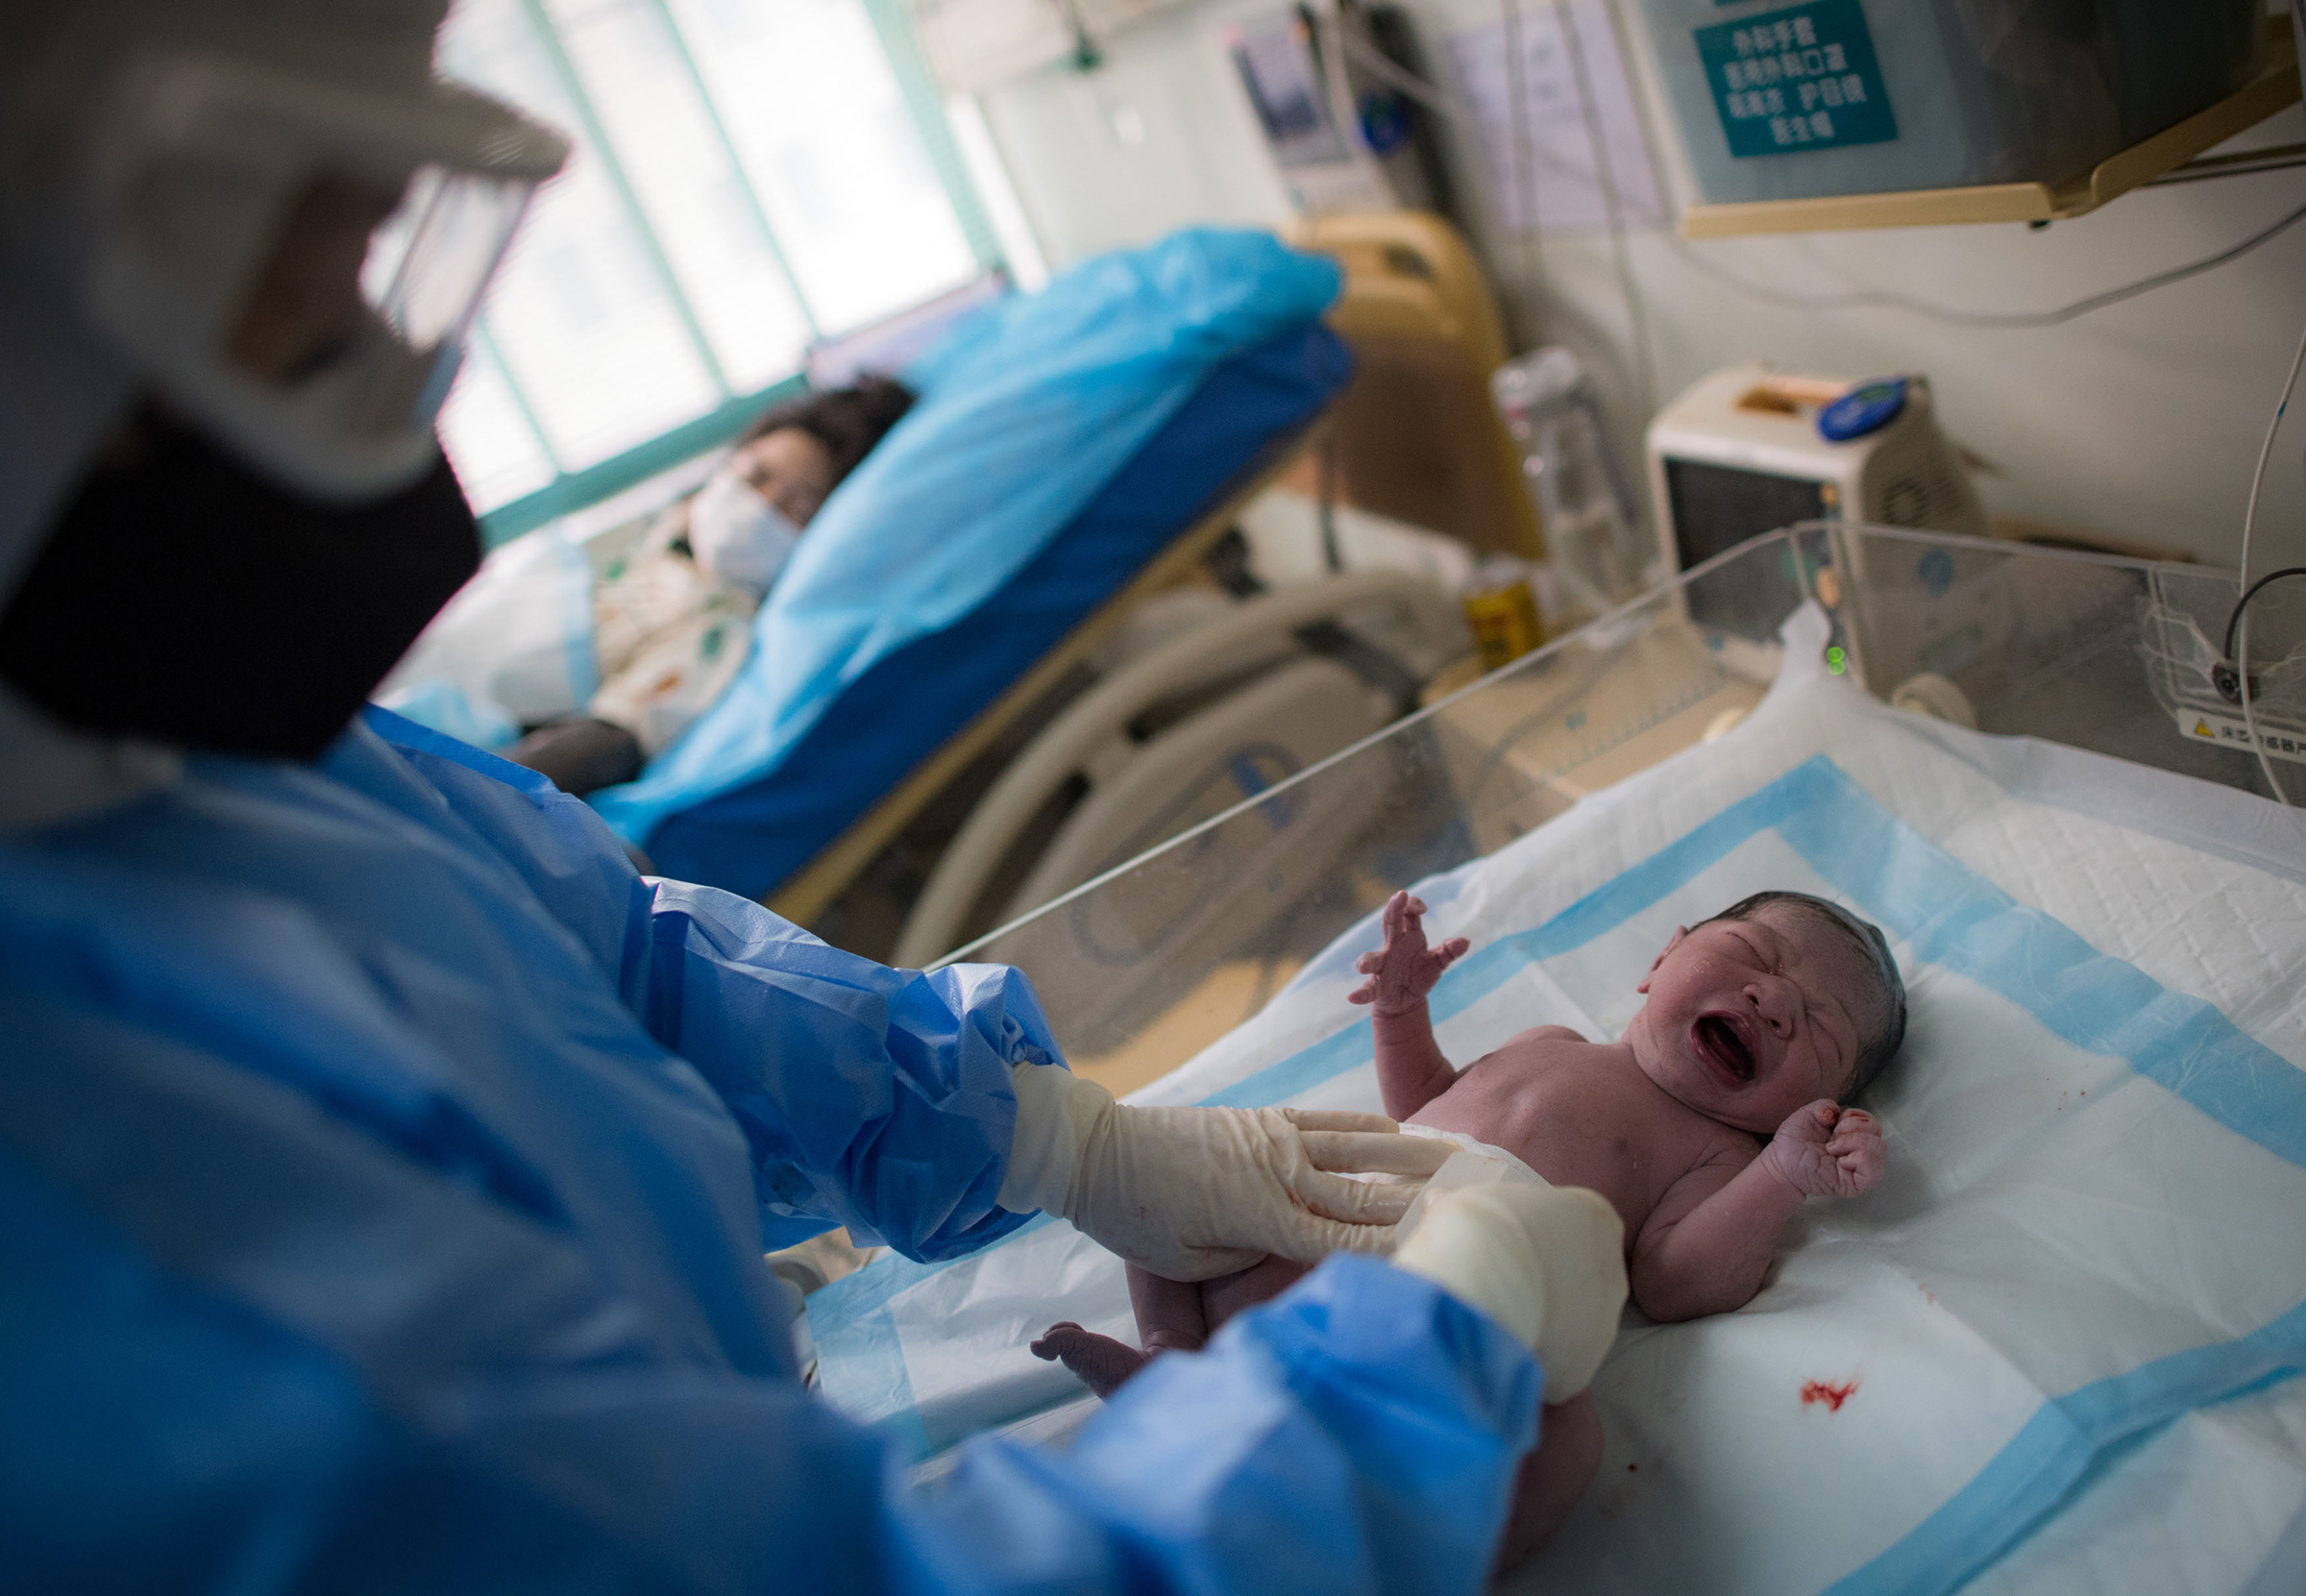 Midwife Wu Dan takes care of Liu Ting's baby at the delivery room of Wuhan Maternal and Child Health Hospital in Wuhan, central China's Hubei Province, March 1, 2020. (Xiao Yijiu—Xinhua/Getty Images)